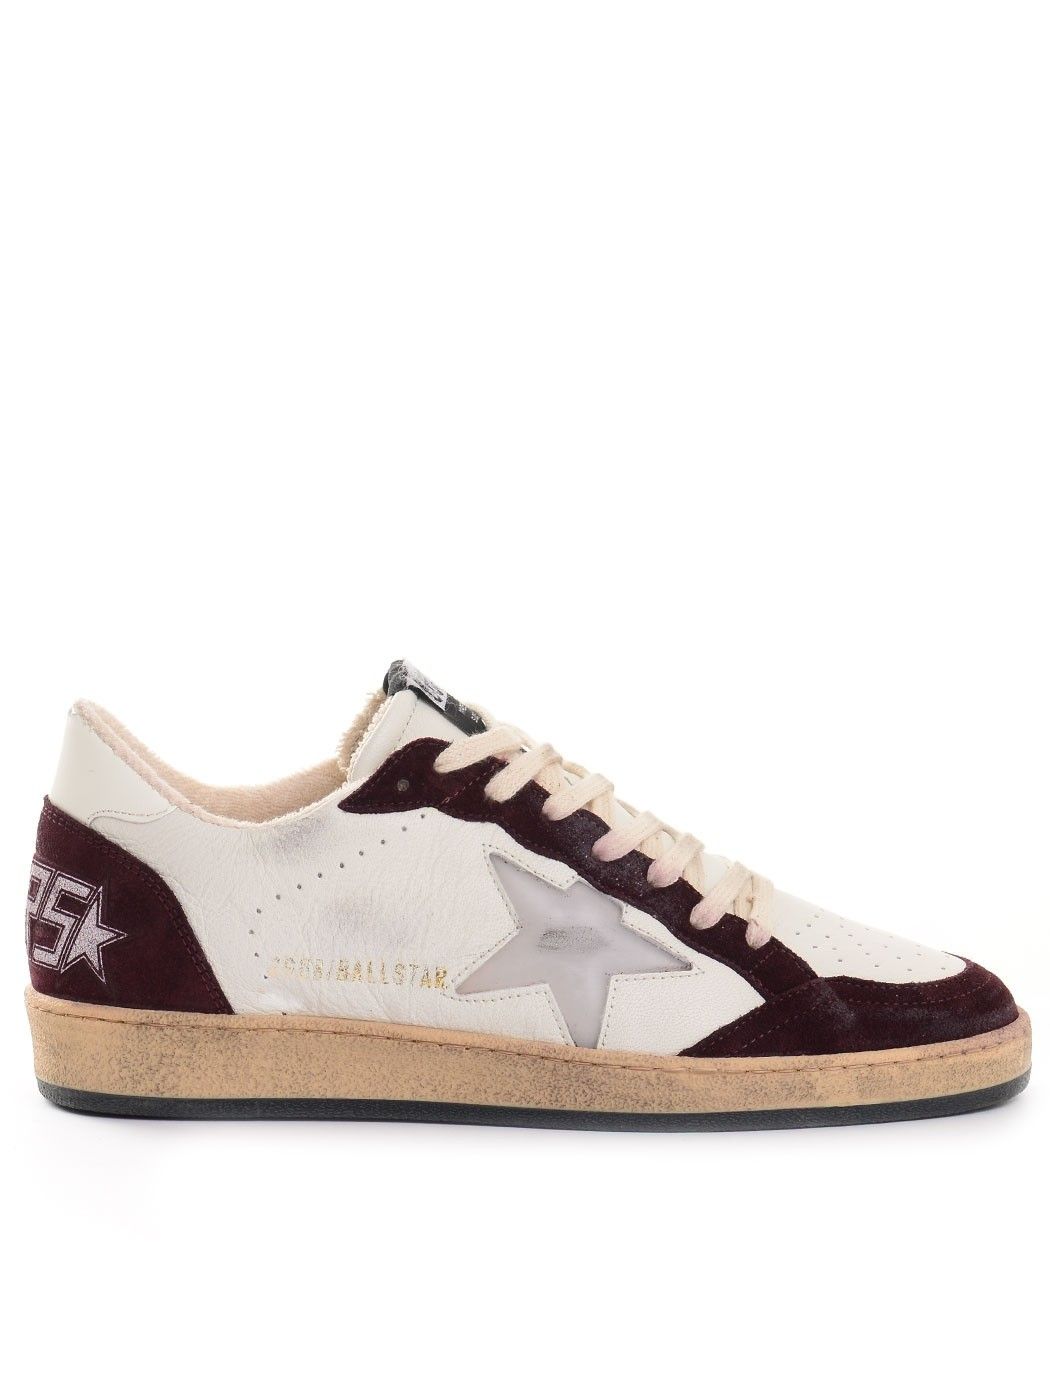  MAN SHOES,SPRING SUMMER SHOES,CHURCH'S SHOES,DIADORA HERITAGE SHOES,DIADORA HERITAGE SNEAKERS,GOLDEN GOOSE SHOES,GOLDEN GOOSE SNEAKERS  GOLDEN GOOSE GMF00117